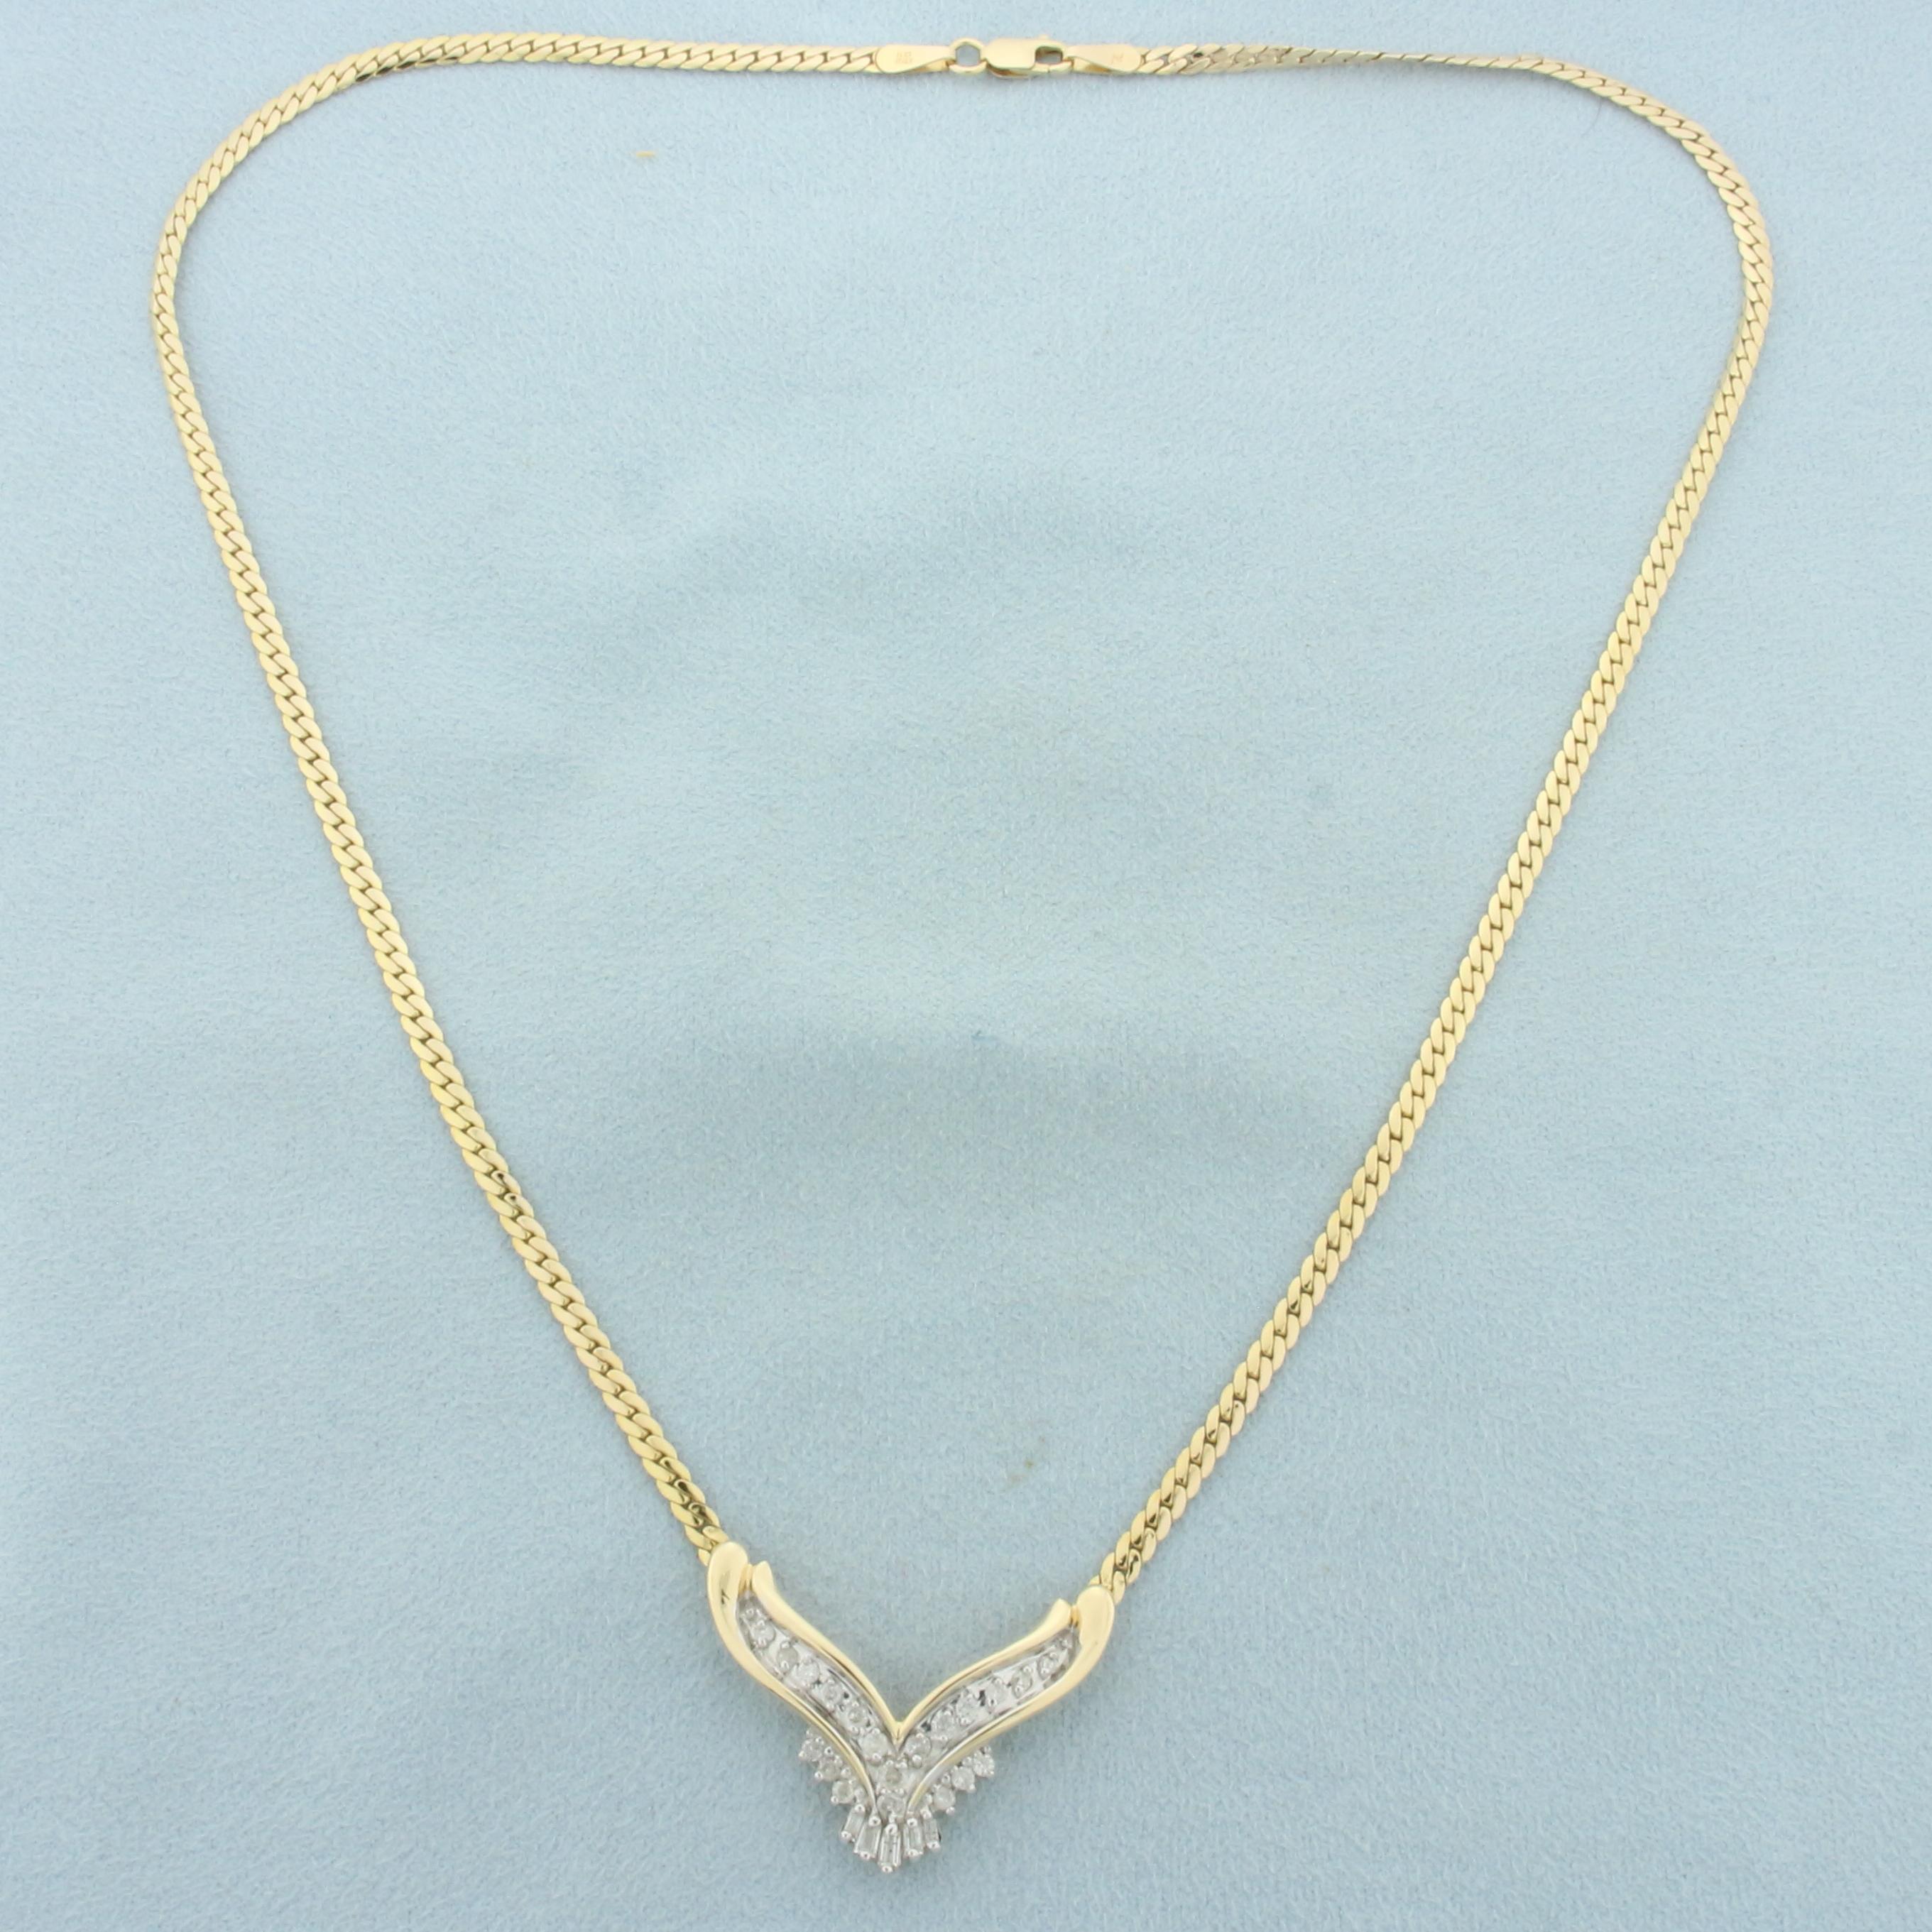 Italian Round And Baguette Diamond Necklace In 14k Yellow Gold